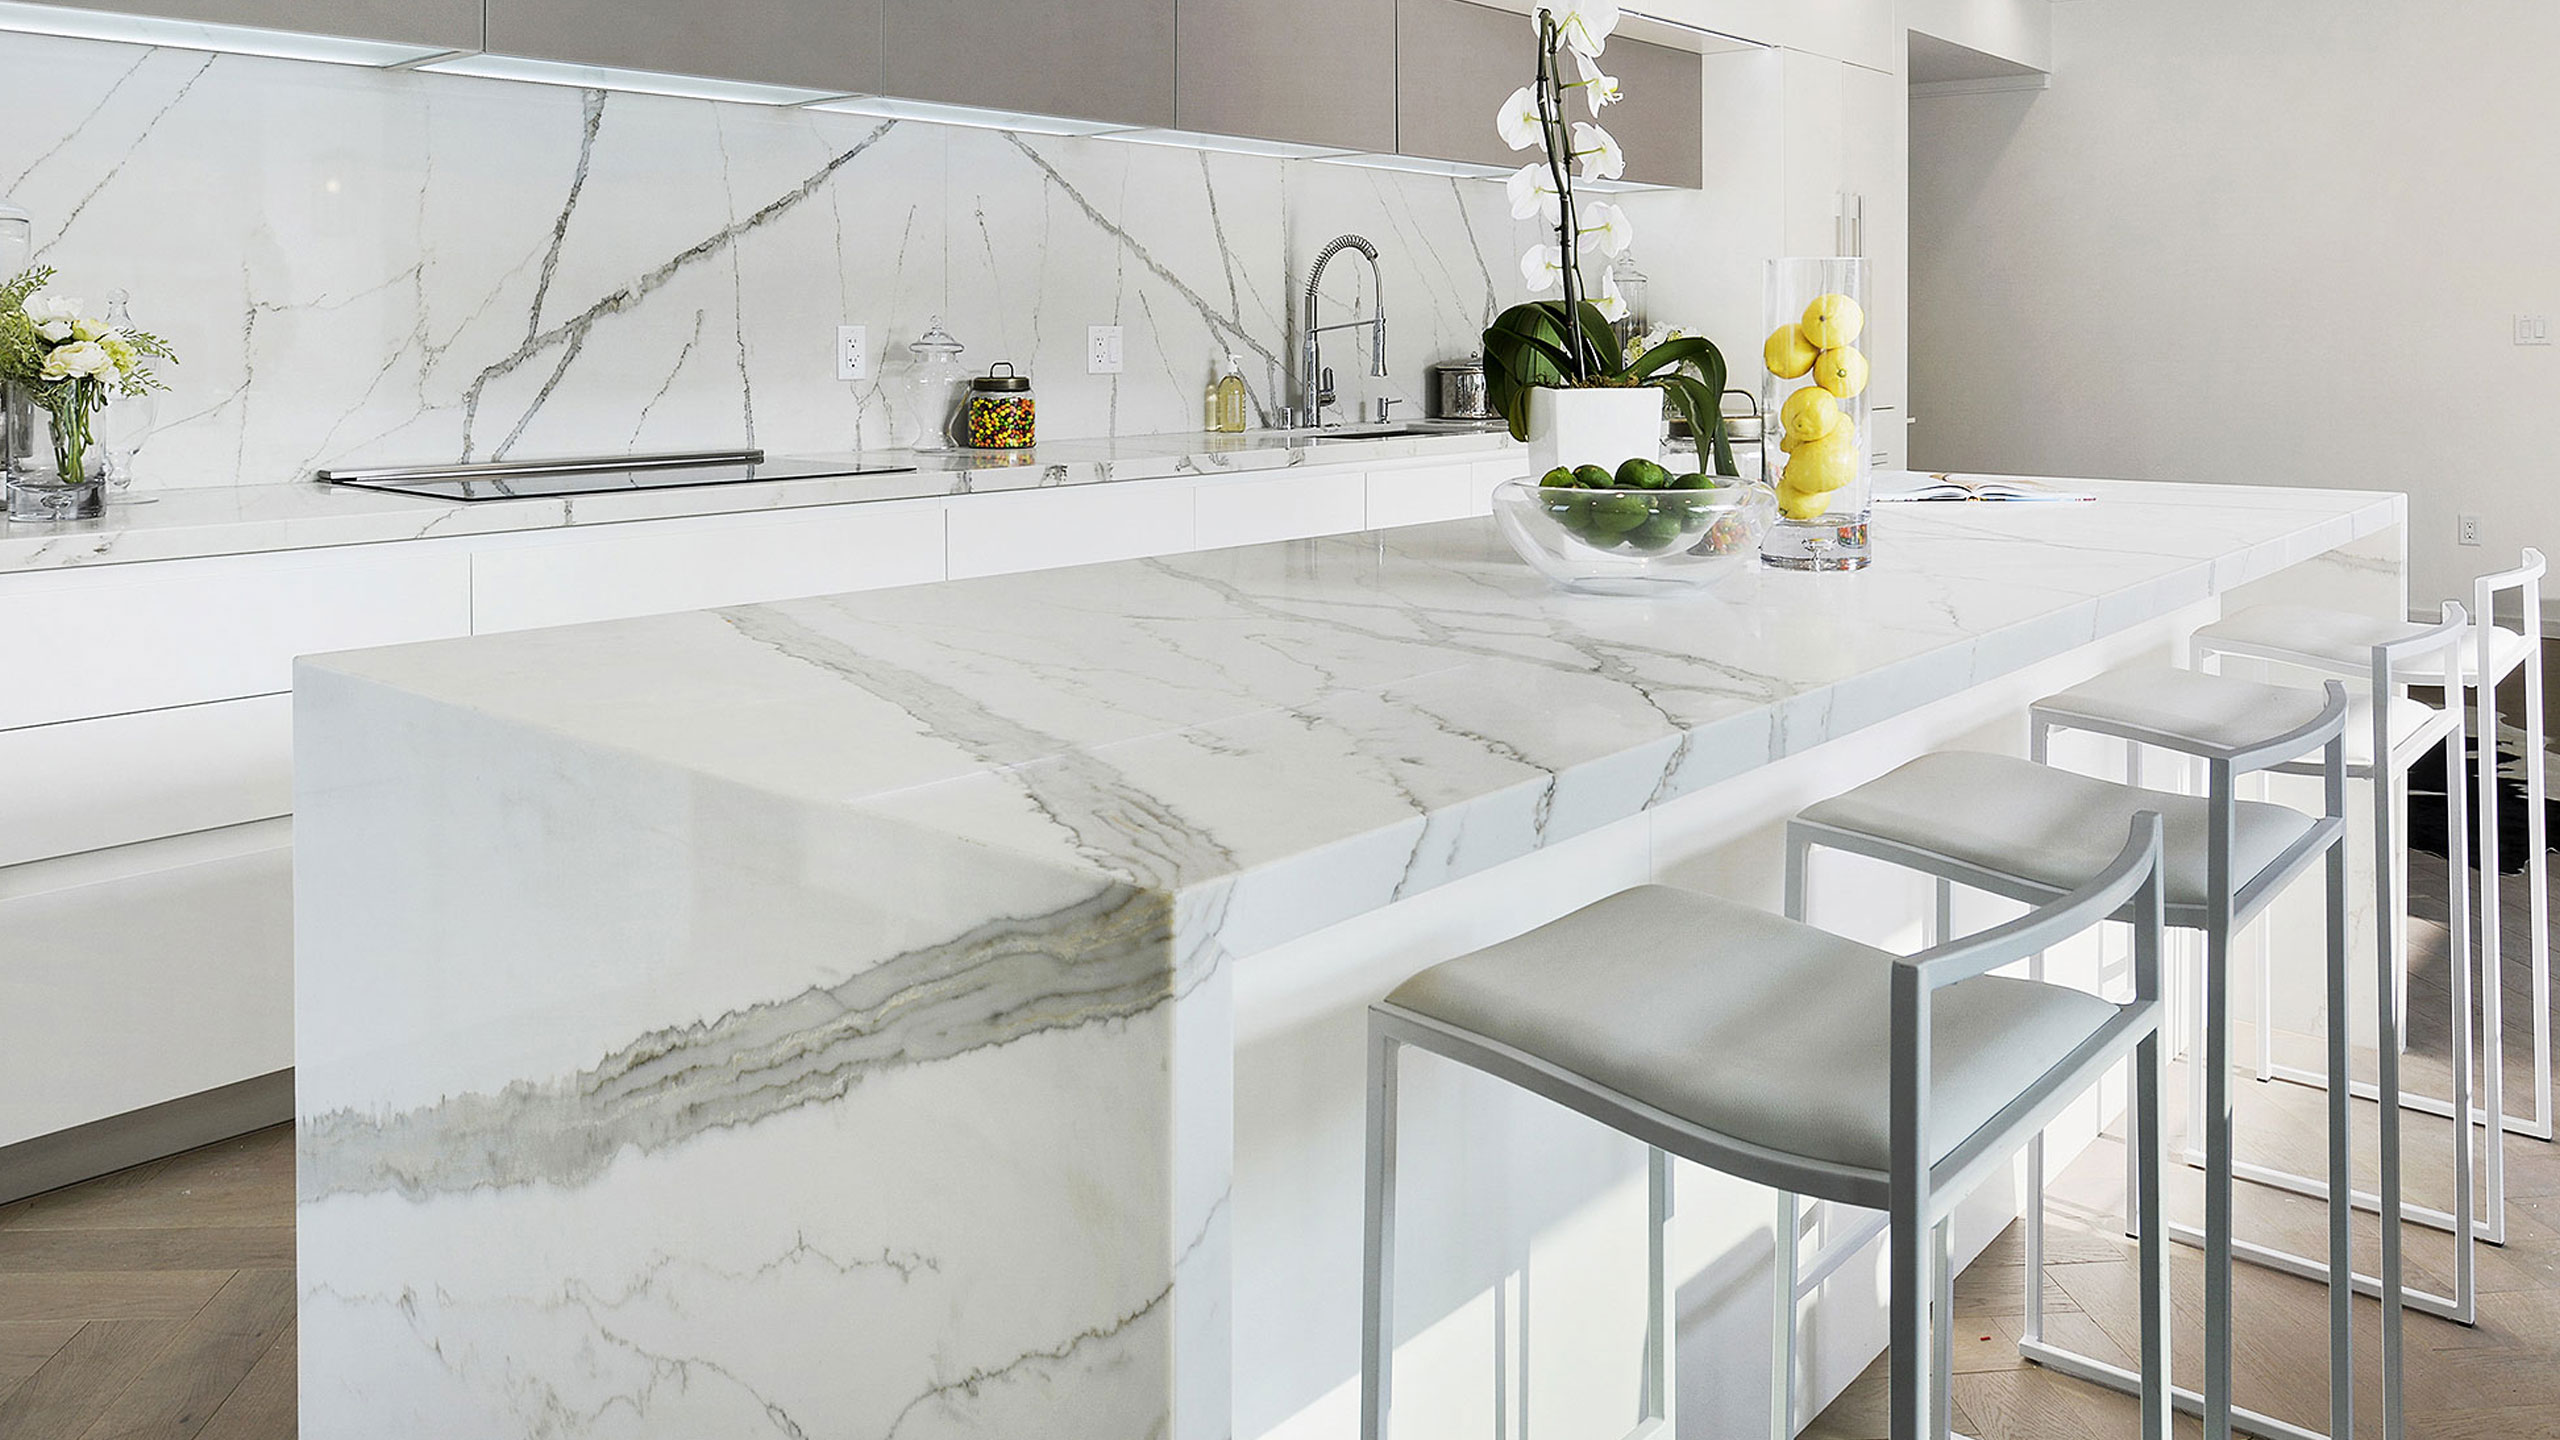 Kitchen Design Built for the Busy Mom - Vadara Quartz Surfaces